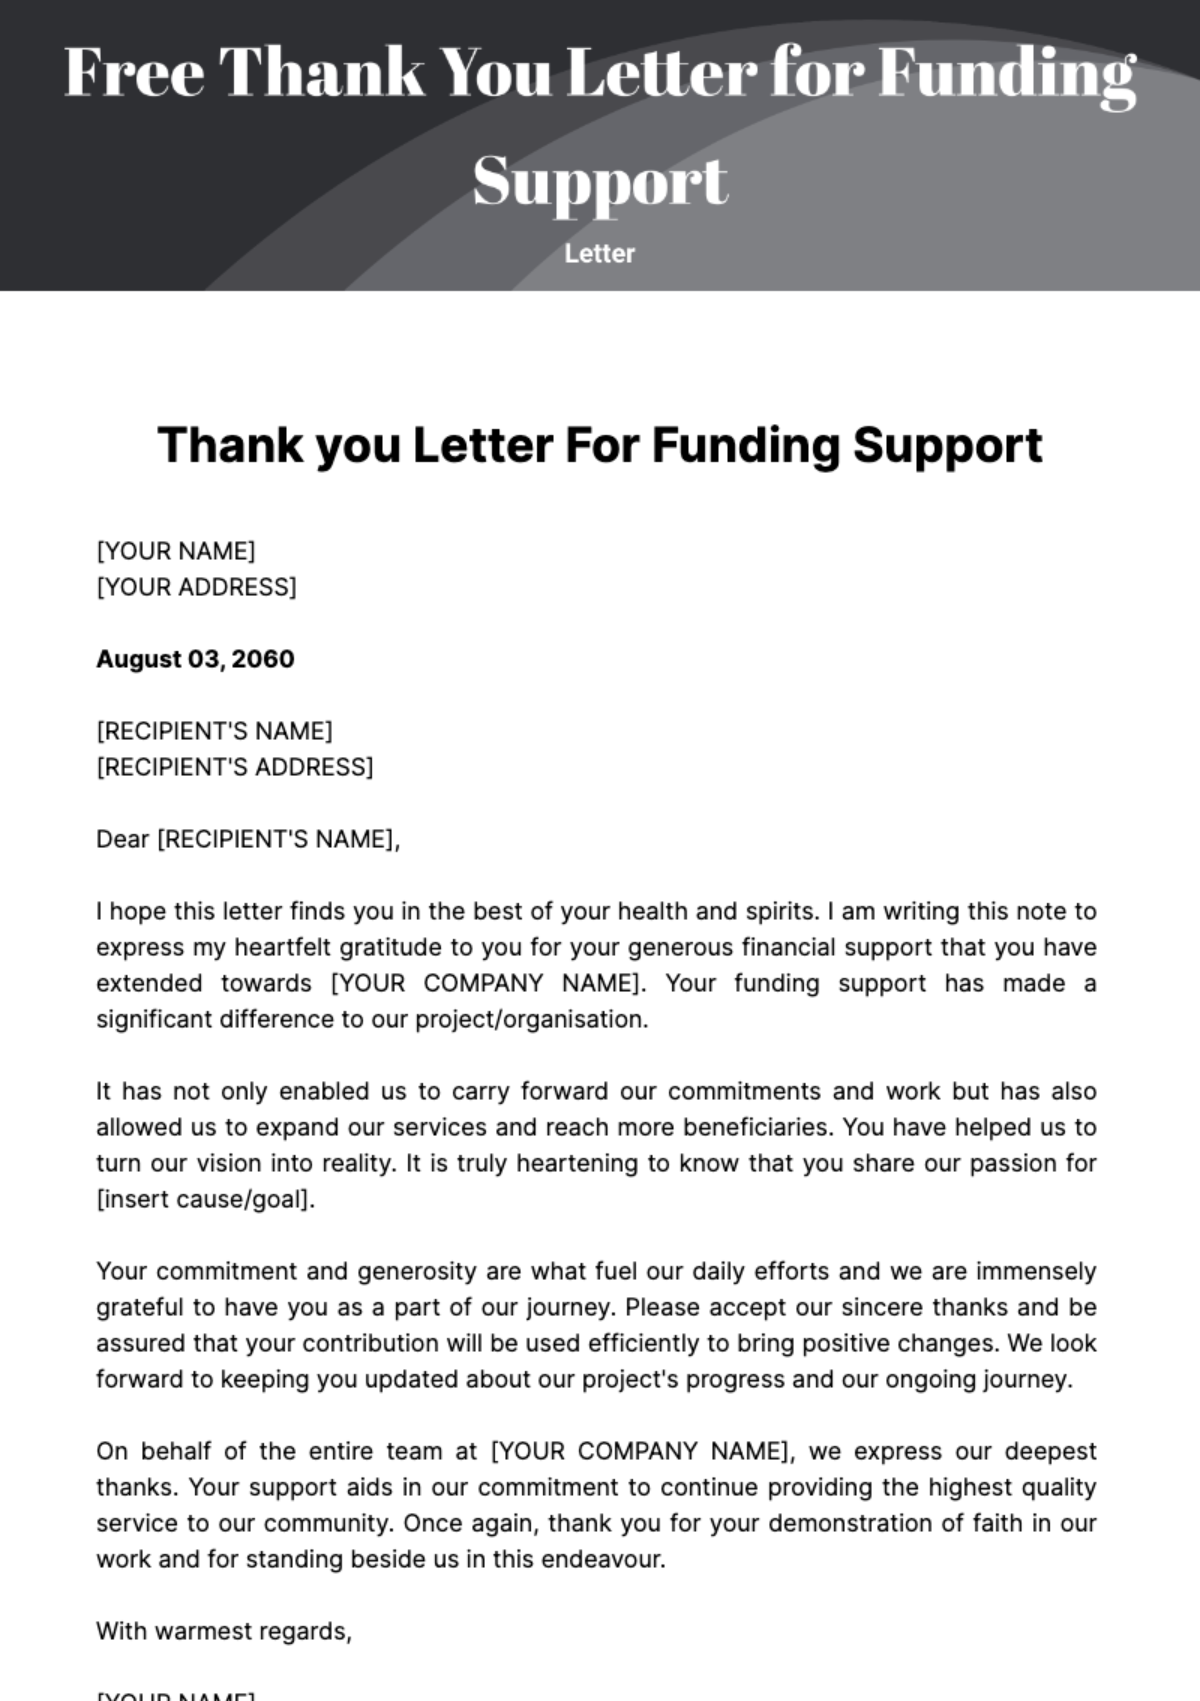 Free Thank you Letter for Funding Support Template